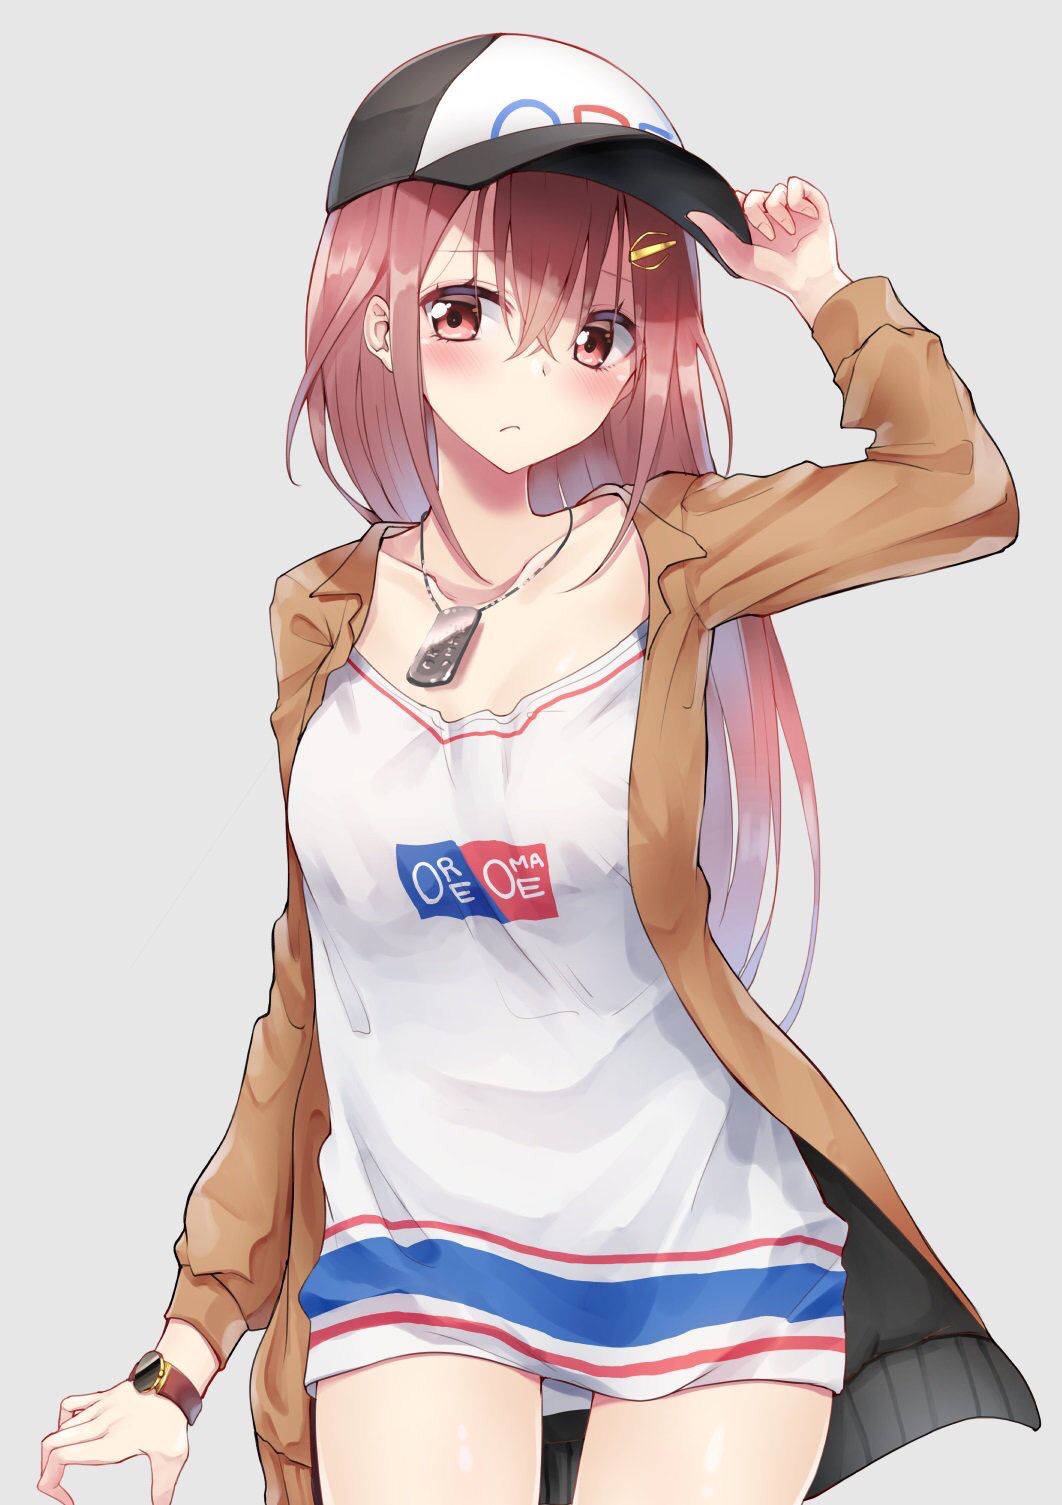 anime girl hat Cute with